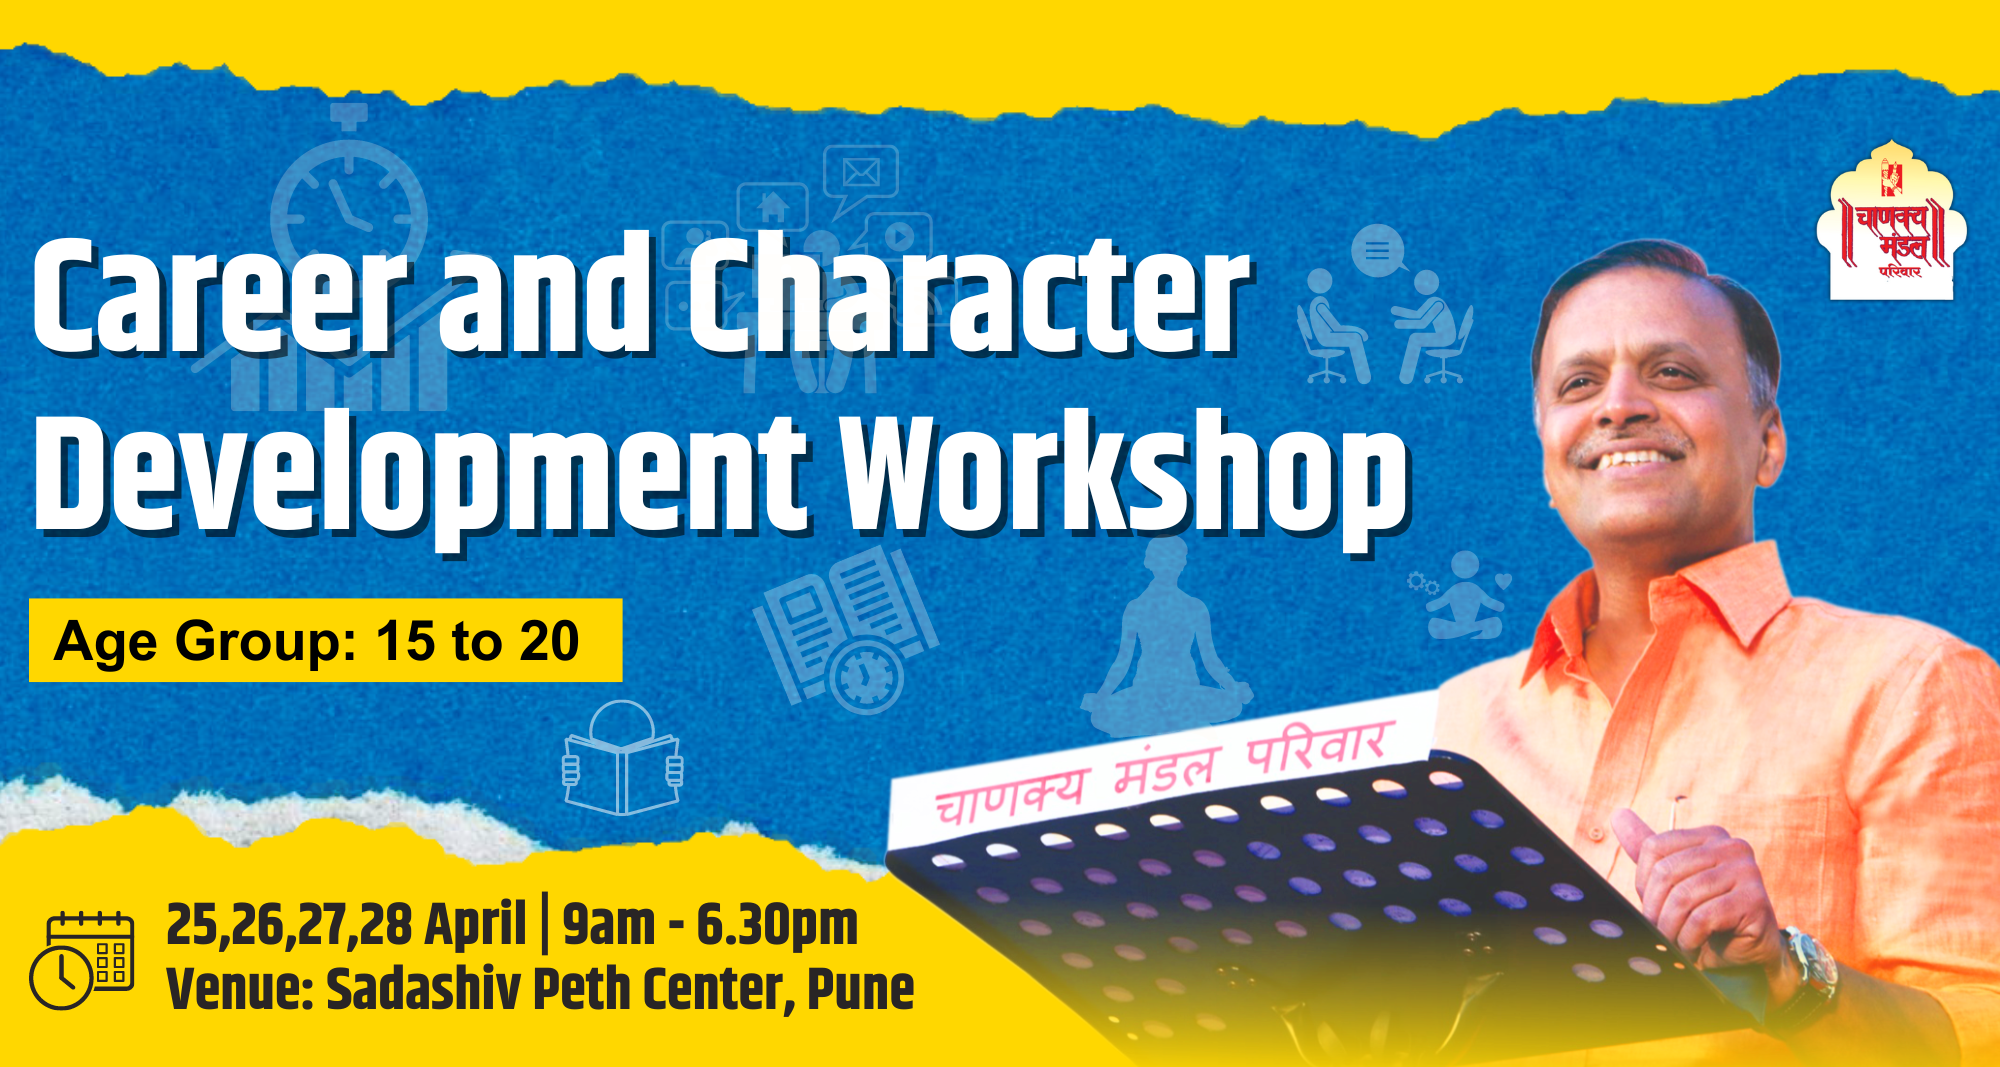 Career and Character Development Workshop (7.5 x 4 in)